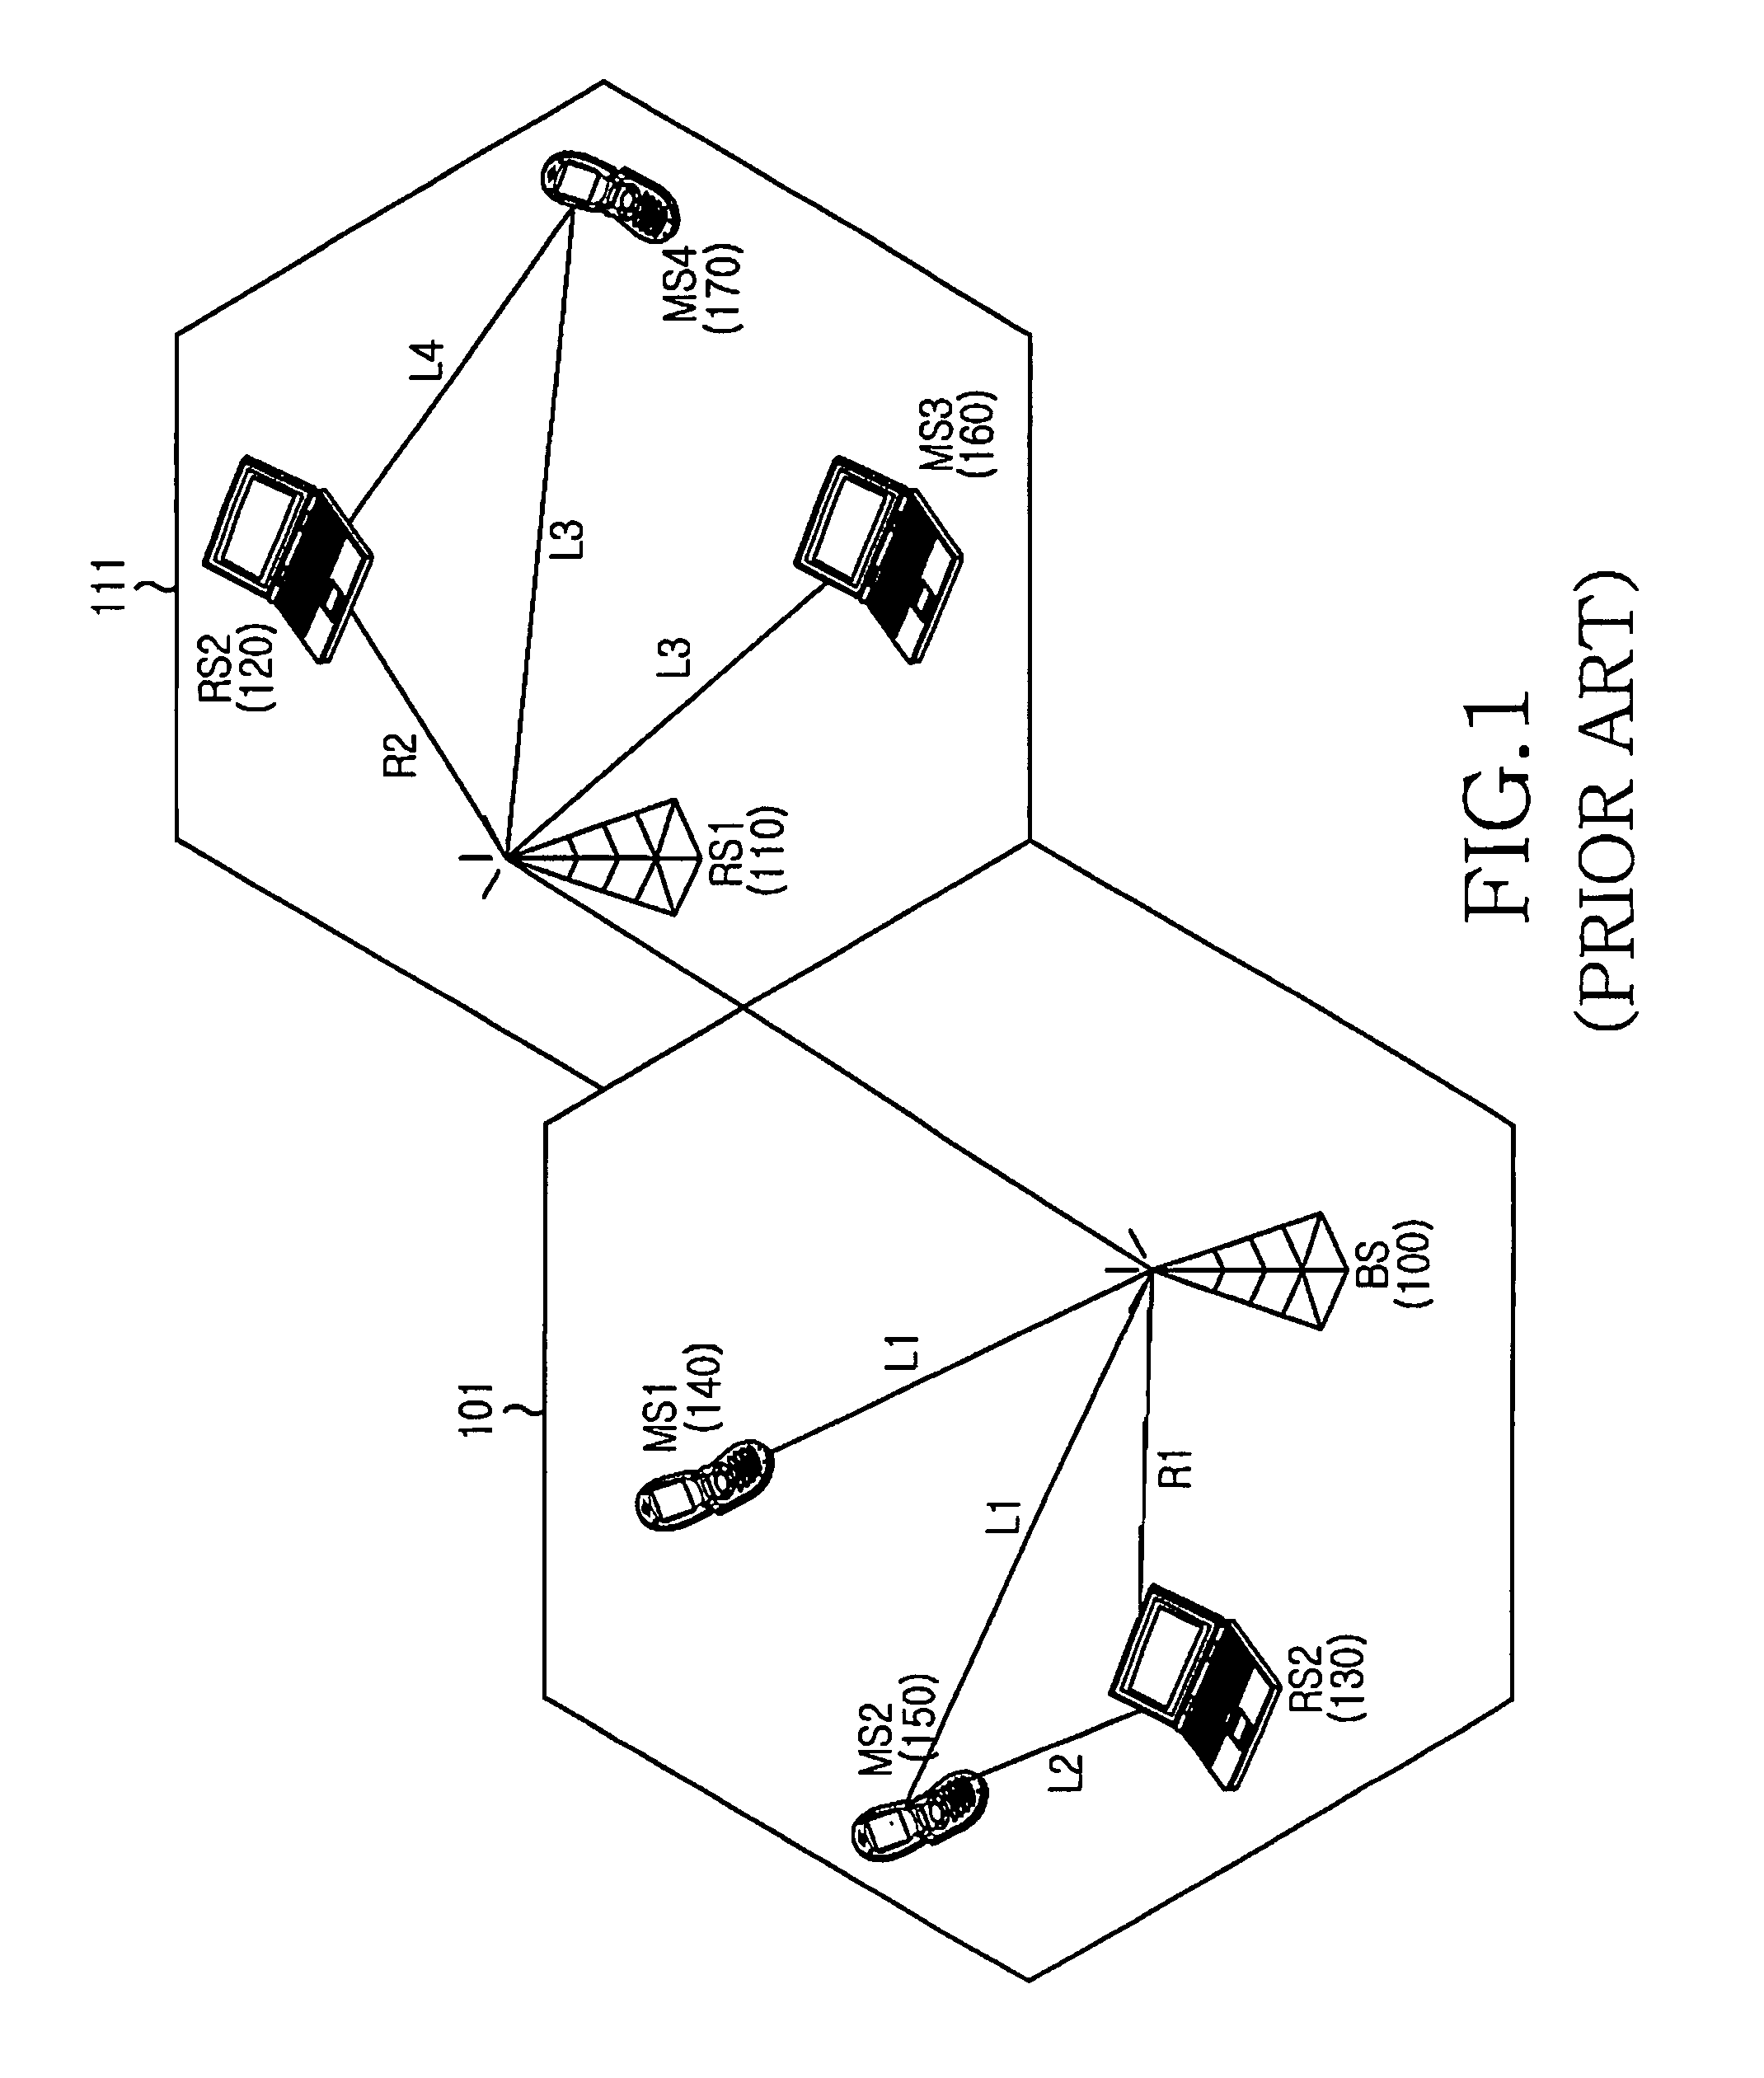 Apparatus and method for supporting relay service in a multi-hop relay broadband wireless access communication system